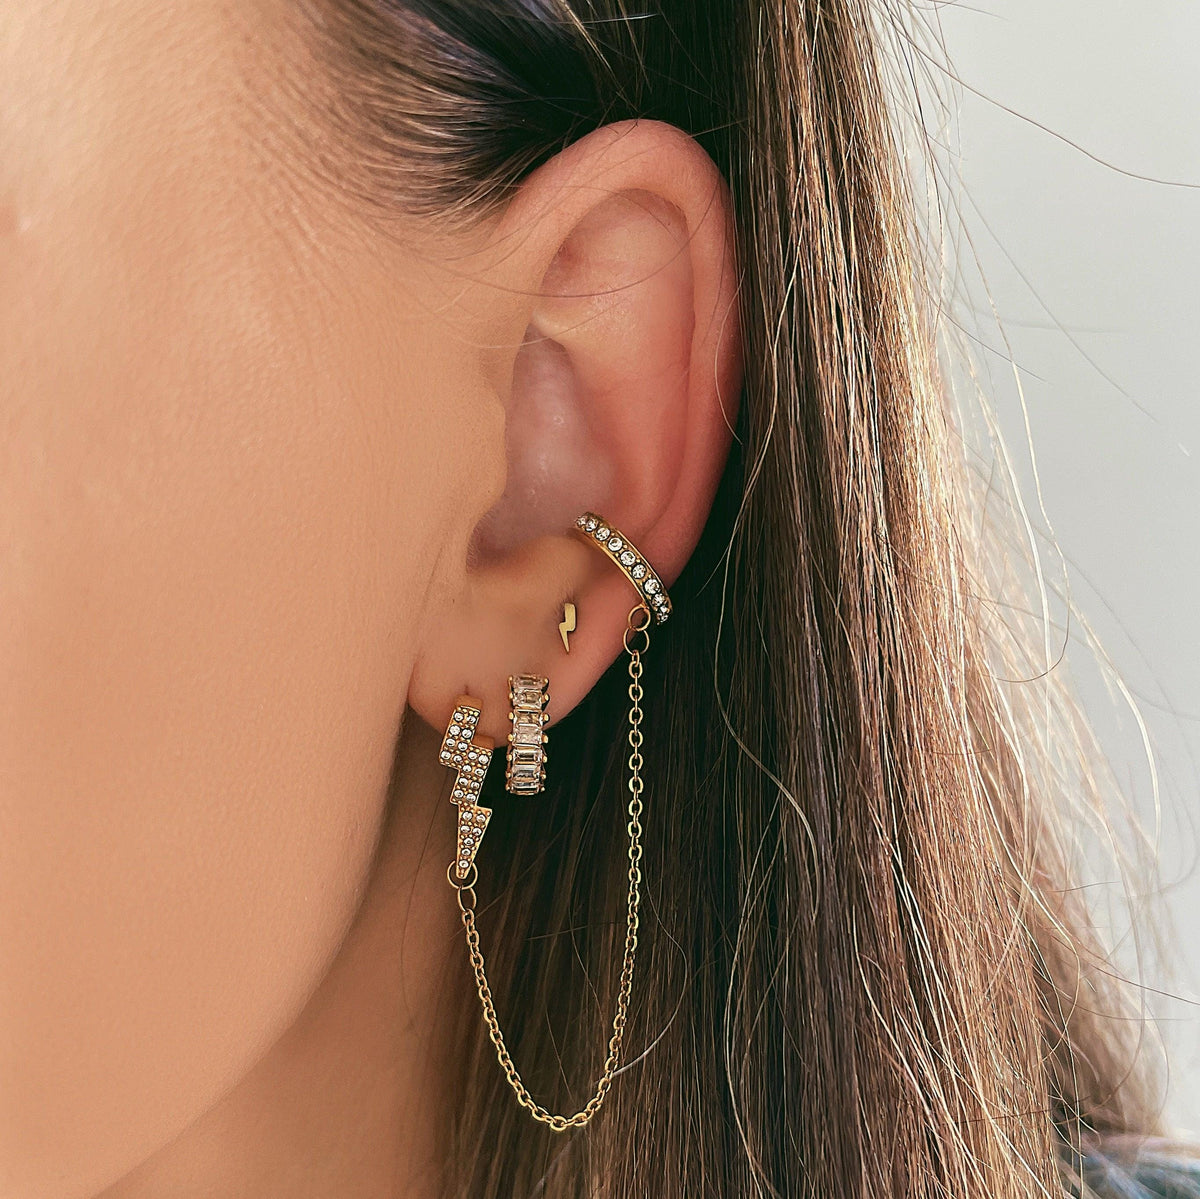 BohoMoon Stainless Steel Thunder Earring & Cuff